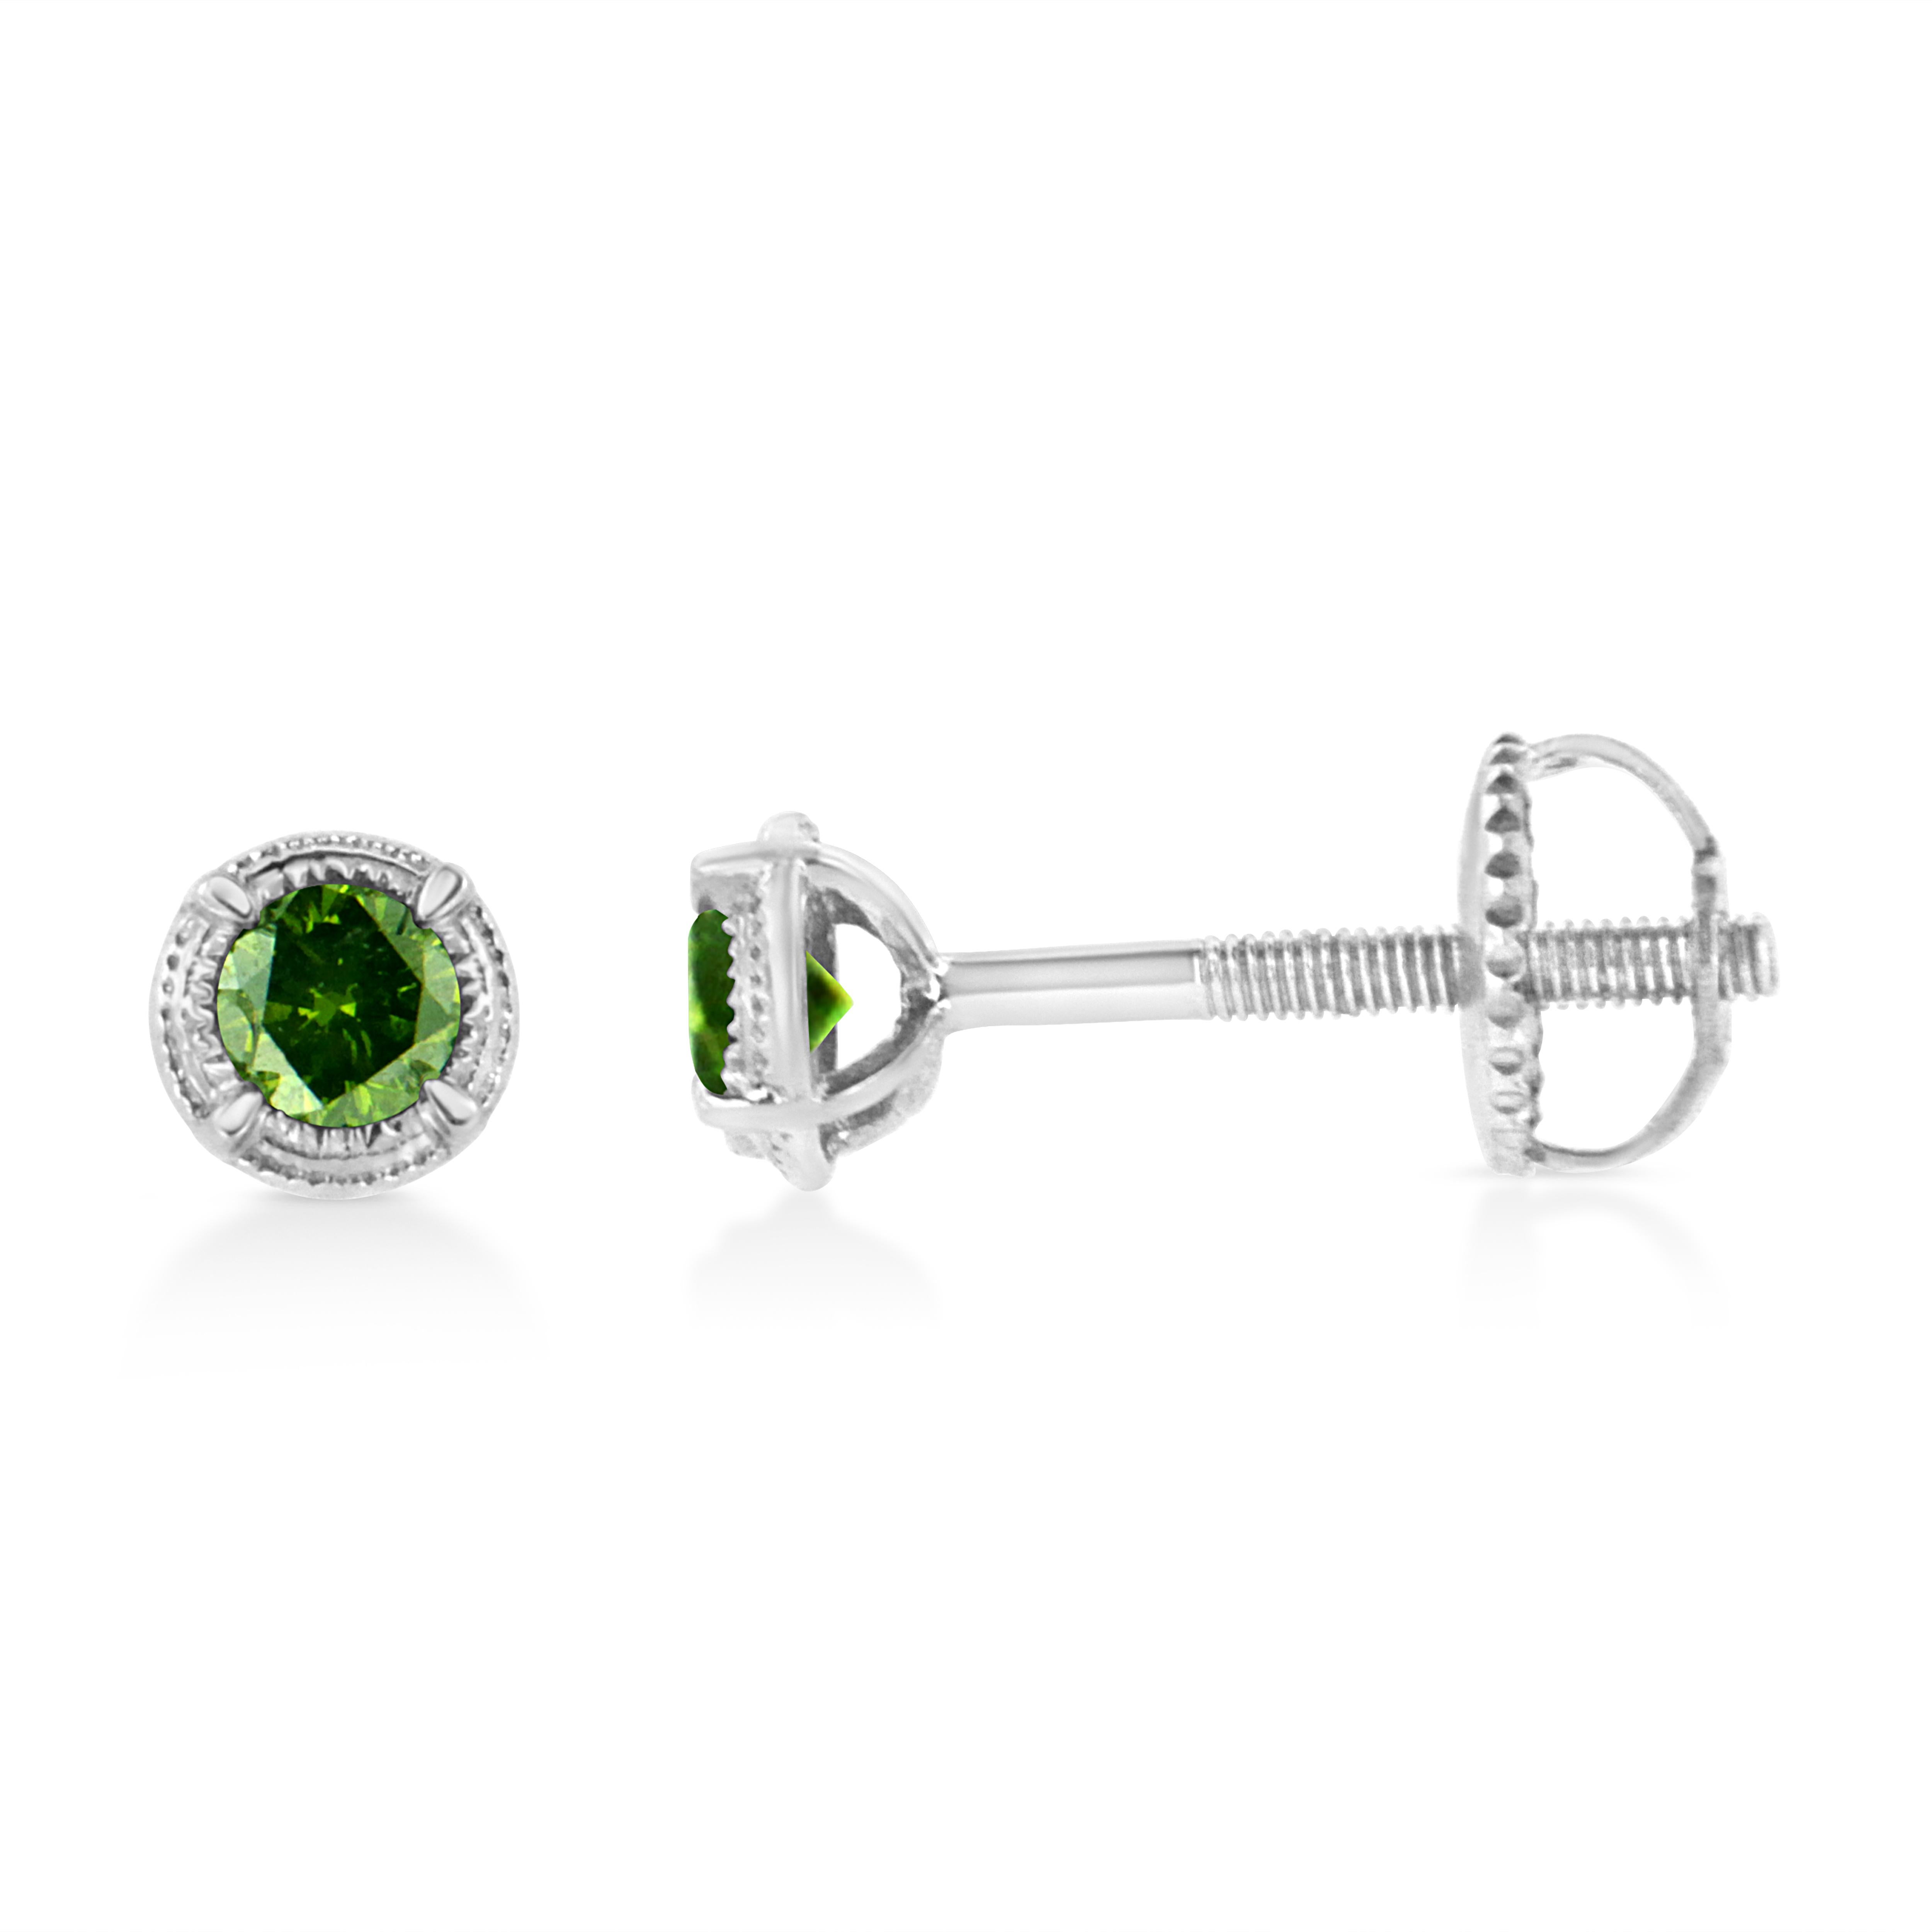 Add this stunningly unique diamond stud earrings to your jewelry collection and impress all your girlfriends. This beautiful pair of studs are made from the finest .925 sterling silver, and is embellished with treated, green round-cut diamonds in a